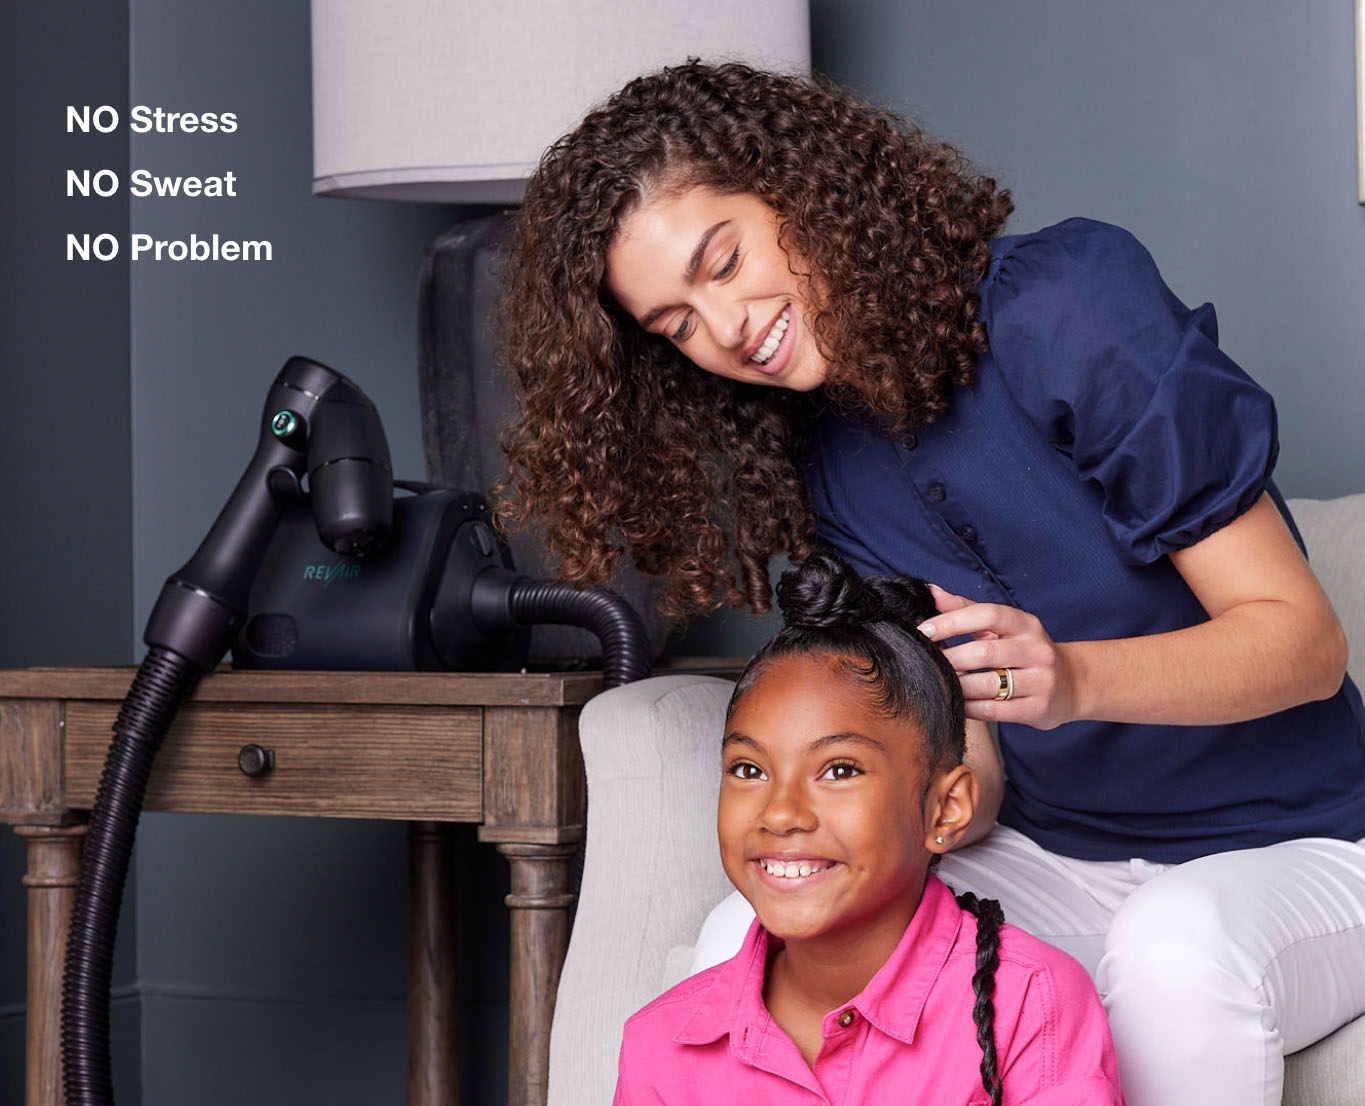 Mother styling daughter's hair with the RevAir device nearby and the words: No stress, no sweat, no problem